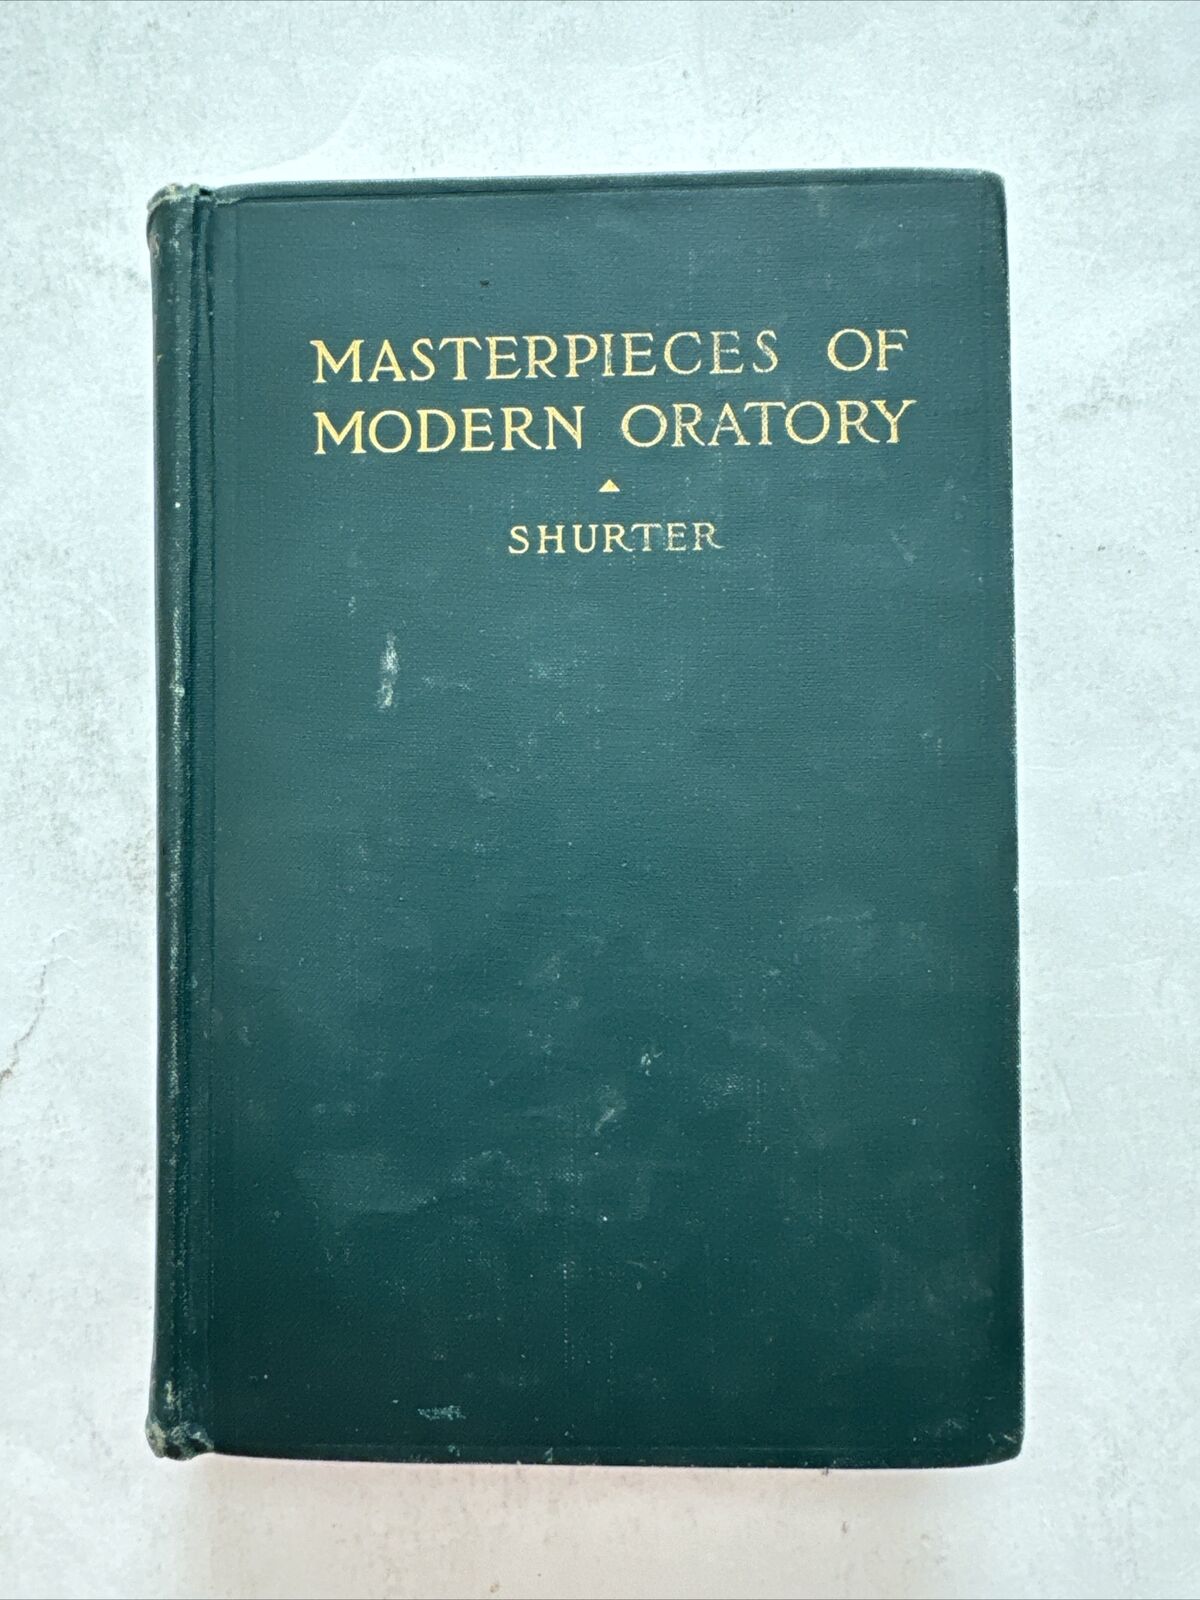 1906 Masterpieces of Modern Oratory by Shurter, Colonies, Murder of Capt. White